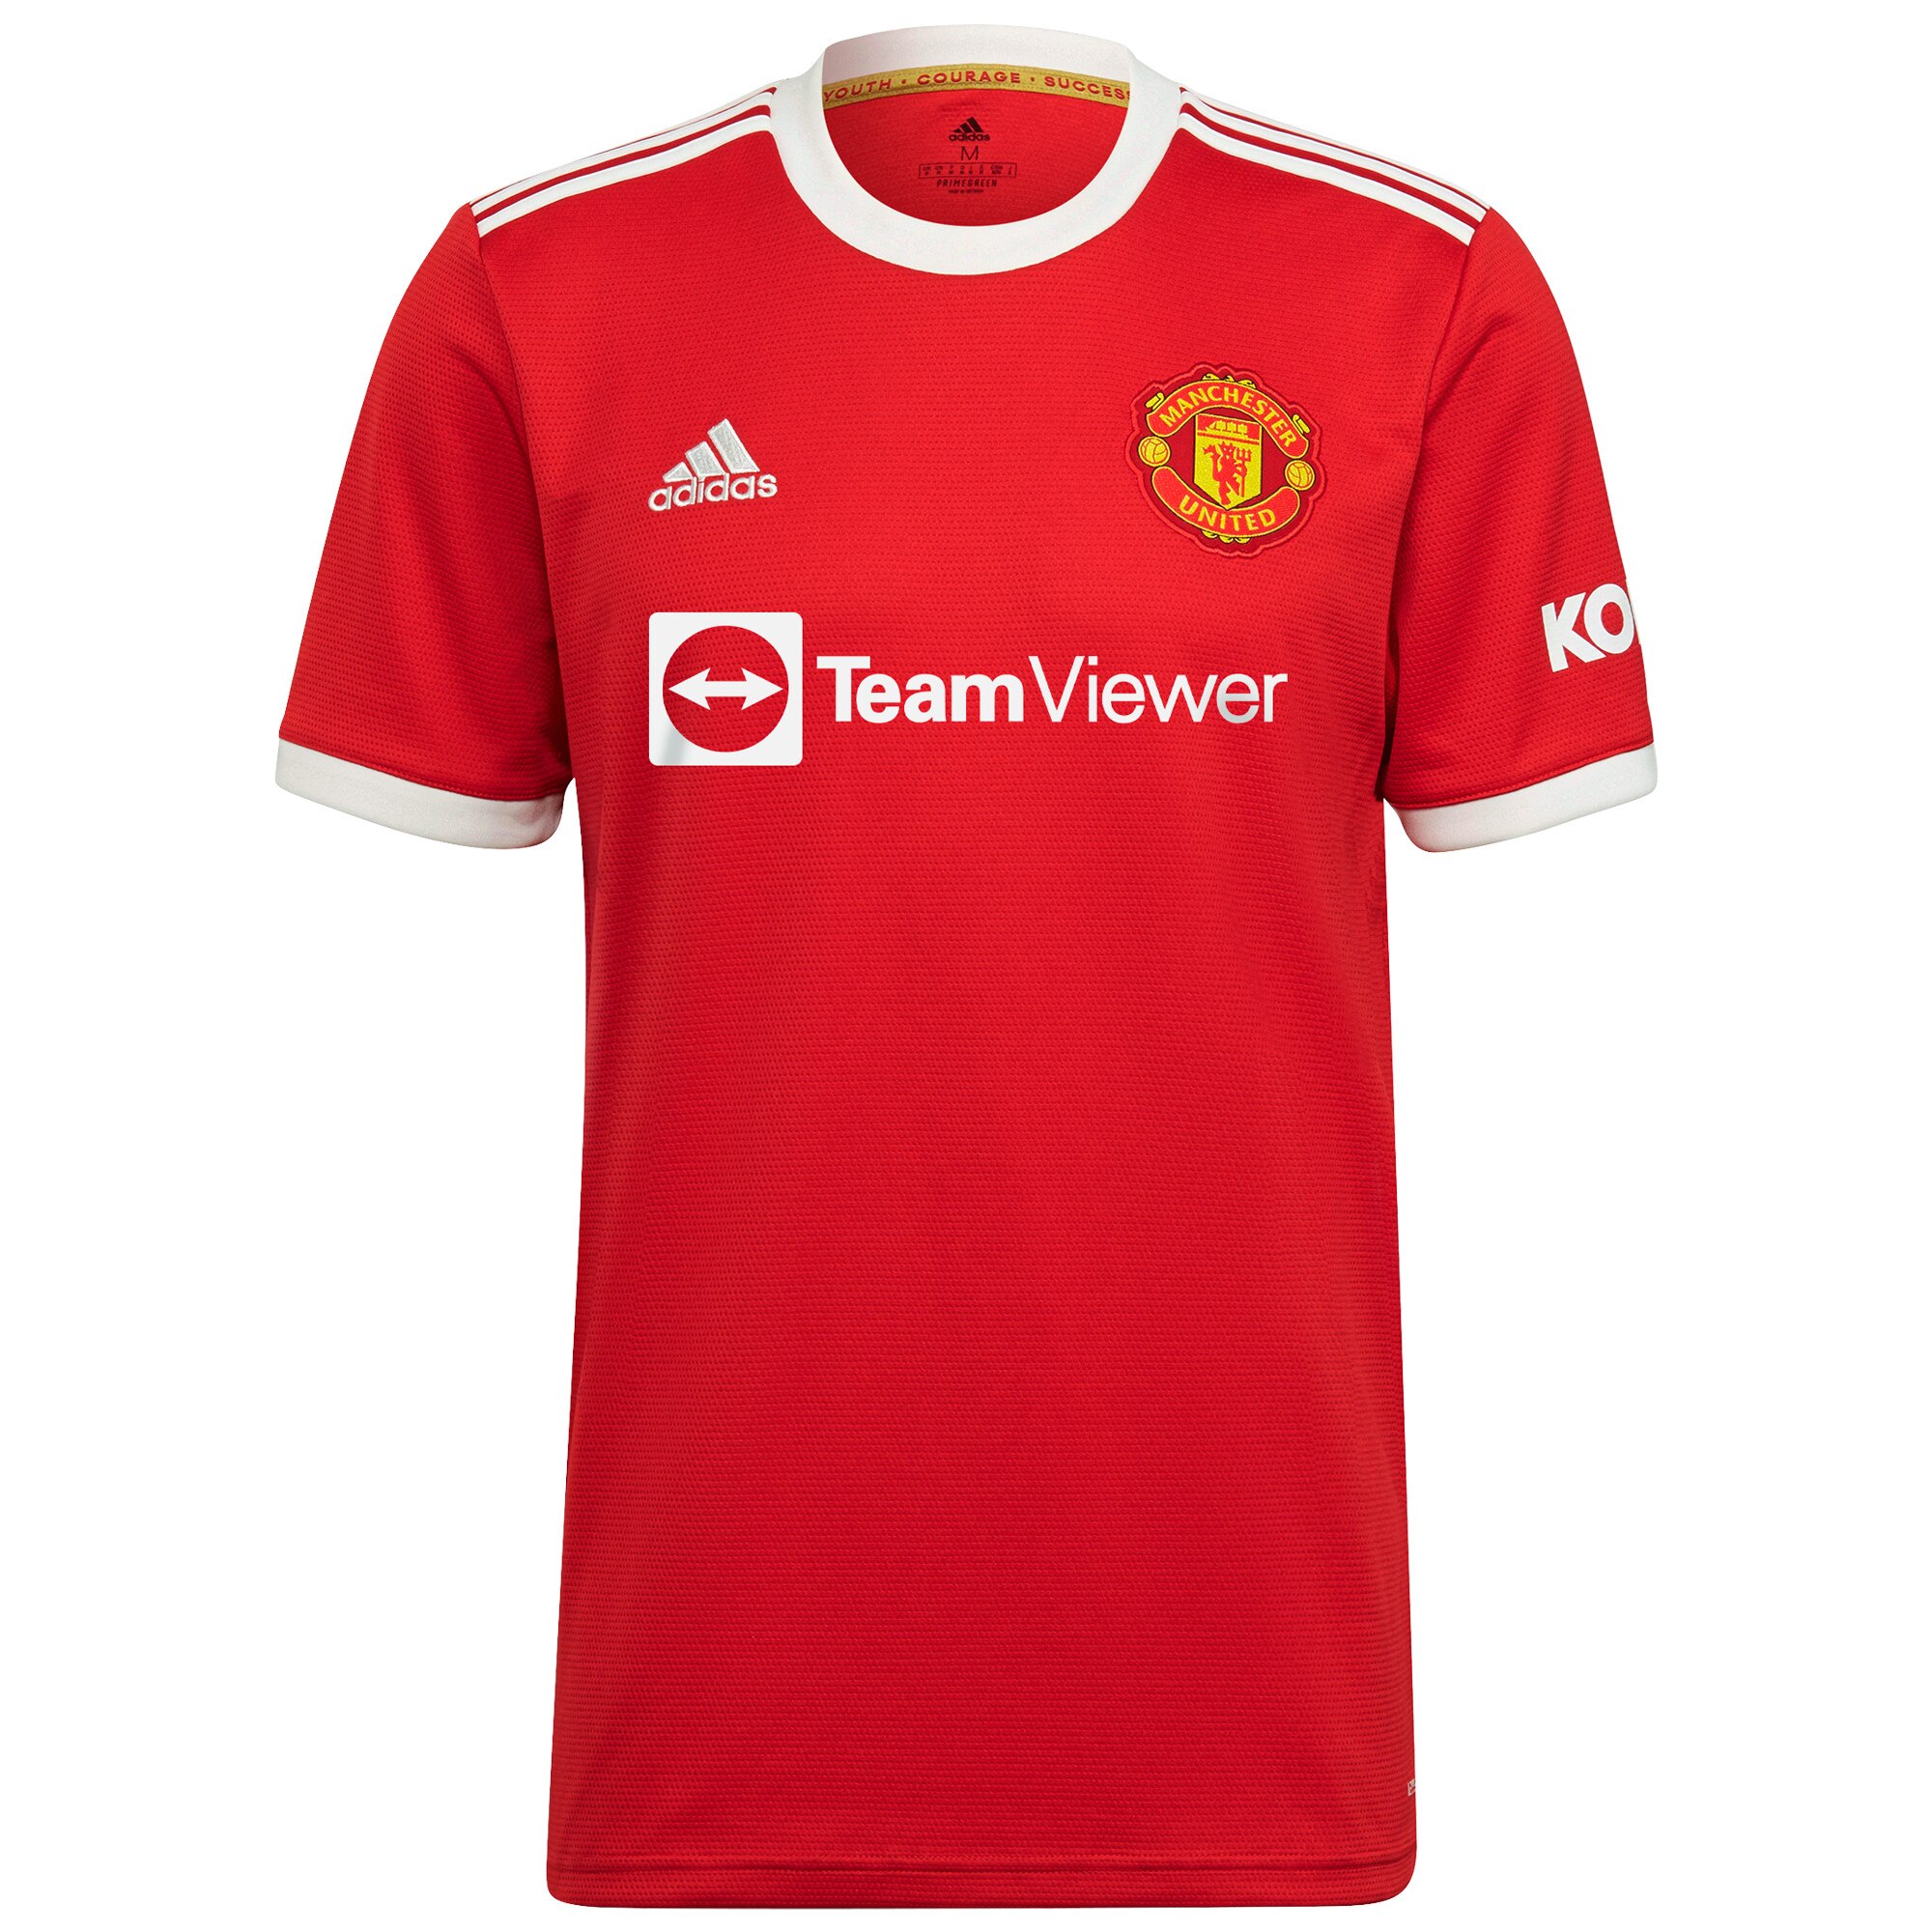 Manchester United Cup Home Shirt 2021-22 with Groenen 14 printing